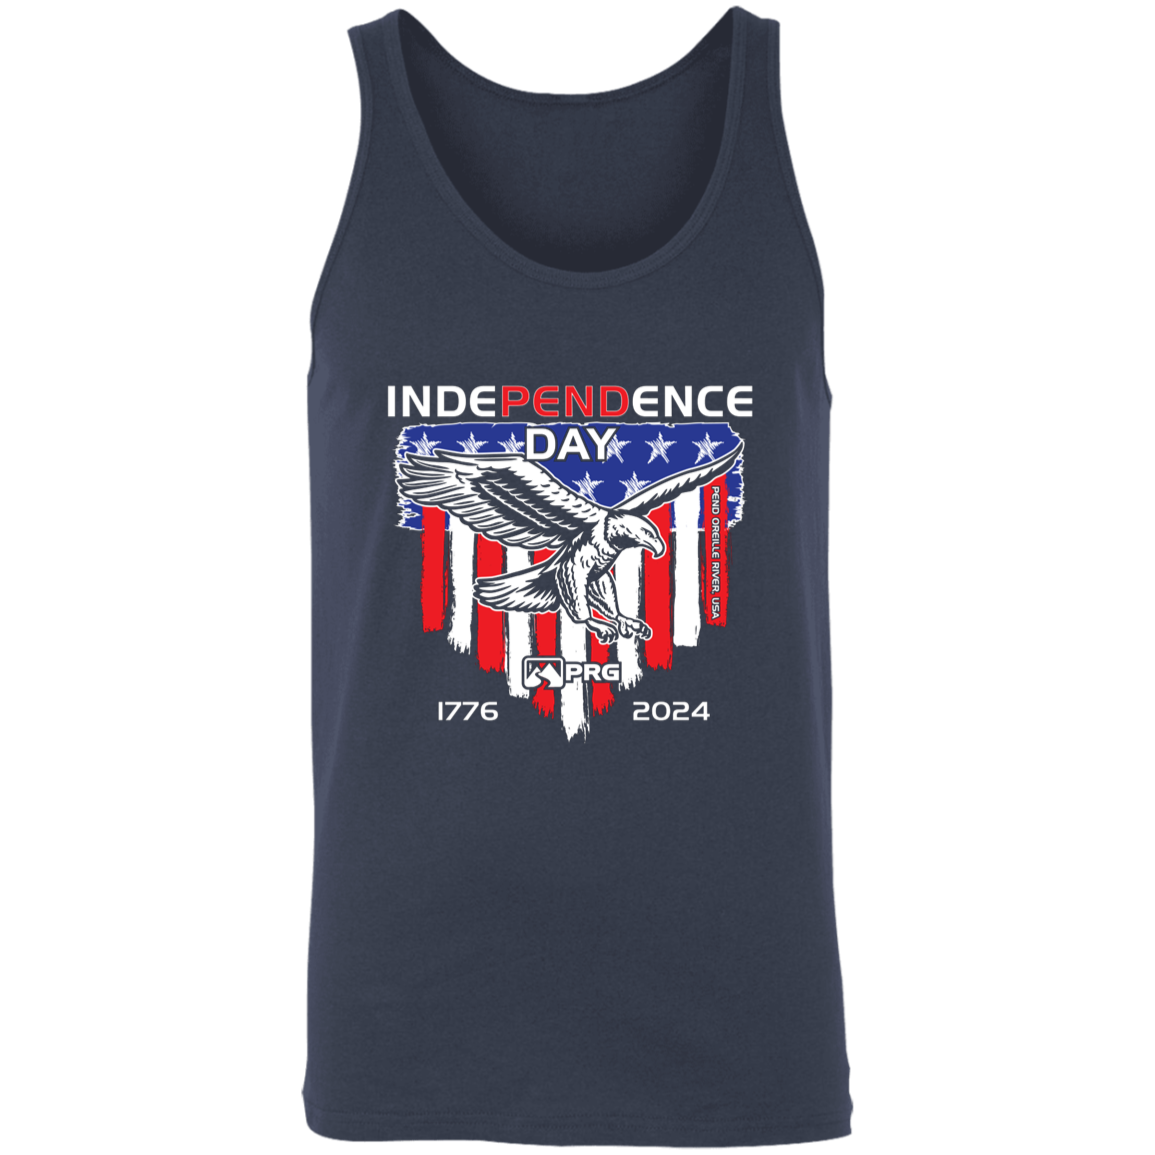 2024 Independence Day - Tank